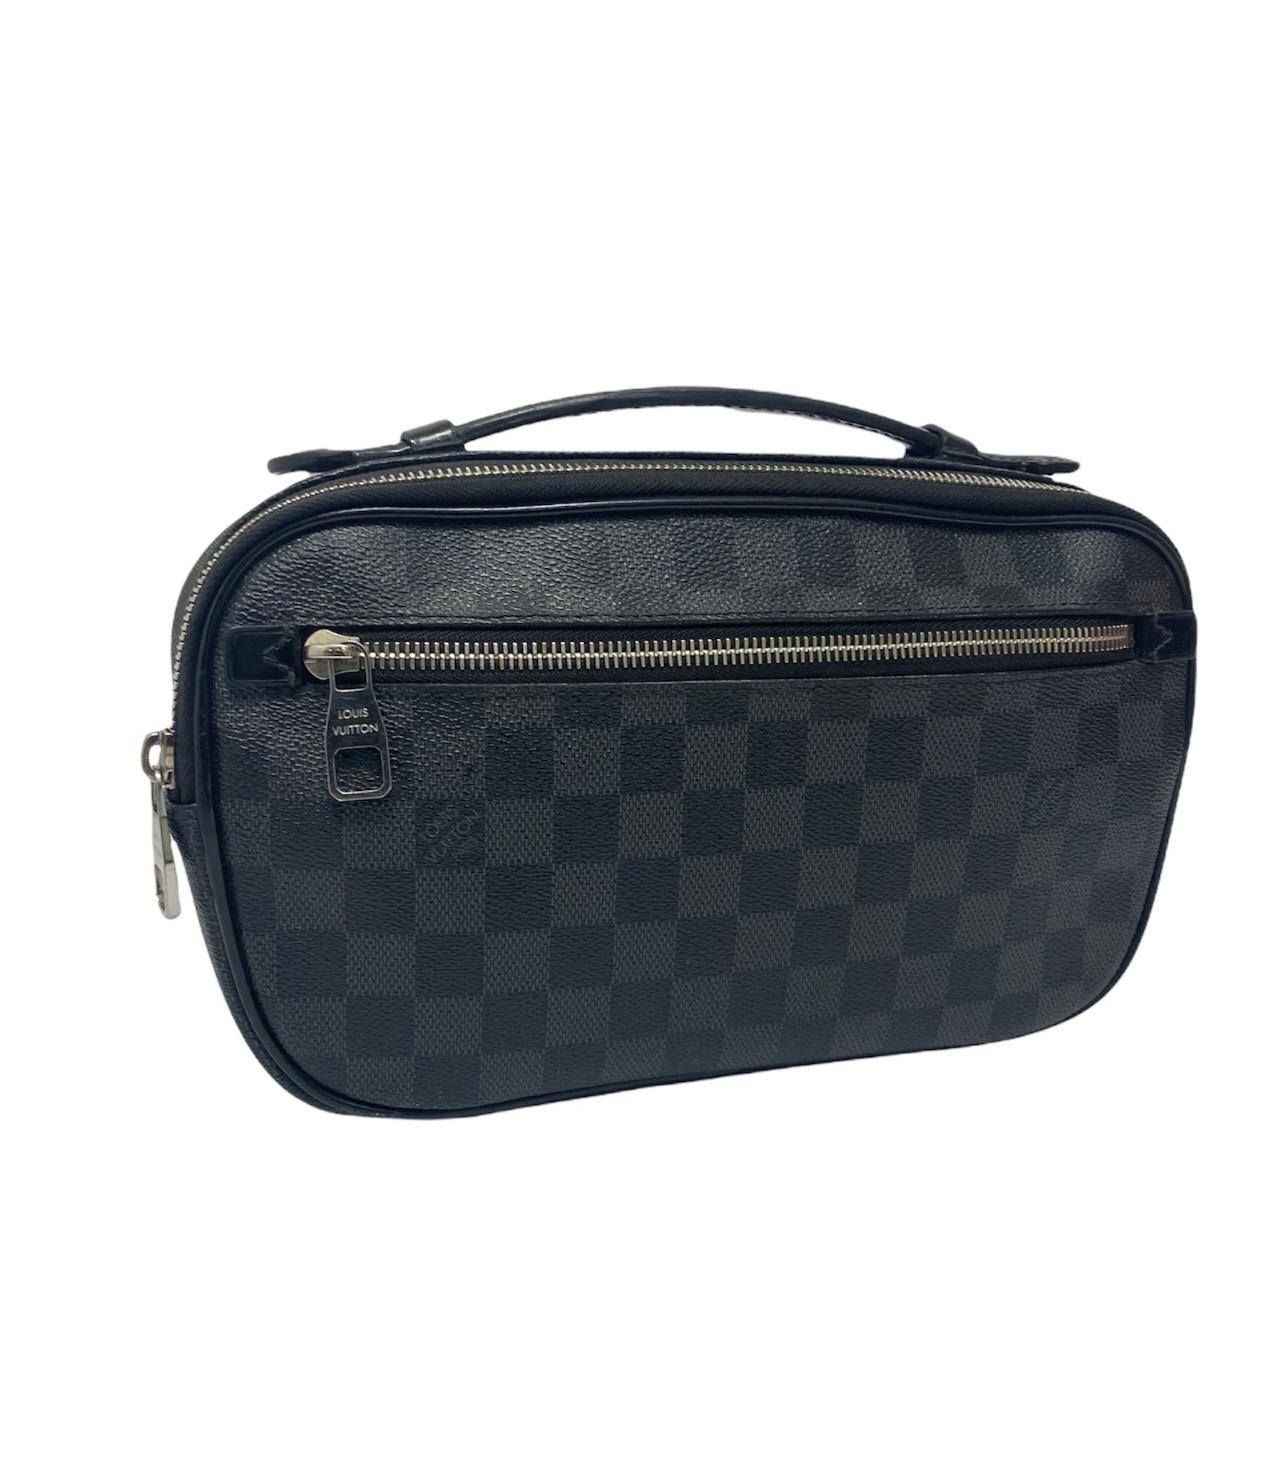   Louis Vuitton belt bag in Damier Graphite canvas and black leather with silver hardware.  It has a central opening with zip, with interior in black fabric and with 3 side pockets.  In addition, it has 2 external pockets, one on the front of the